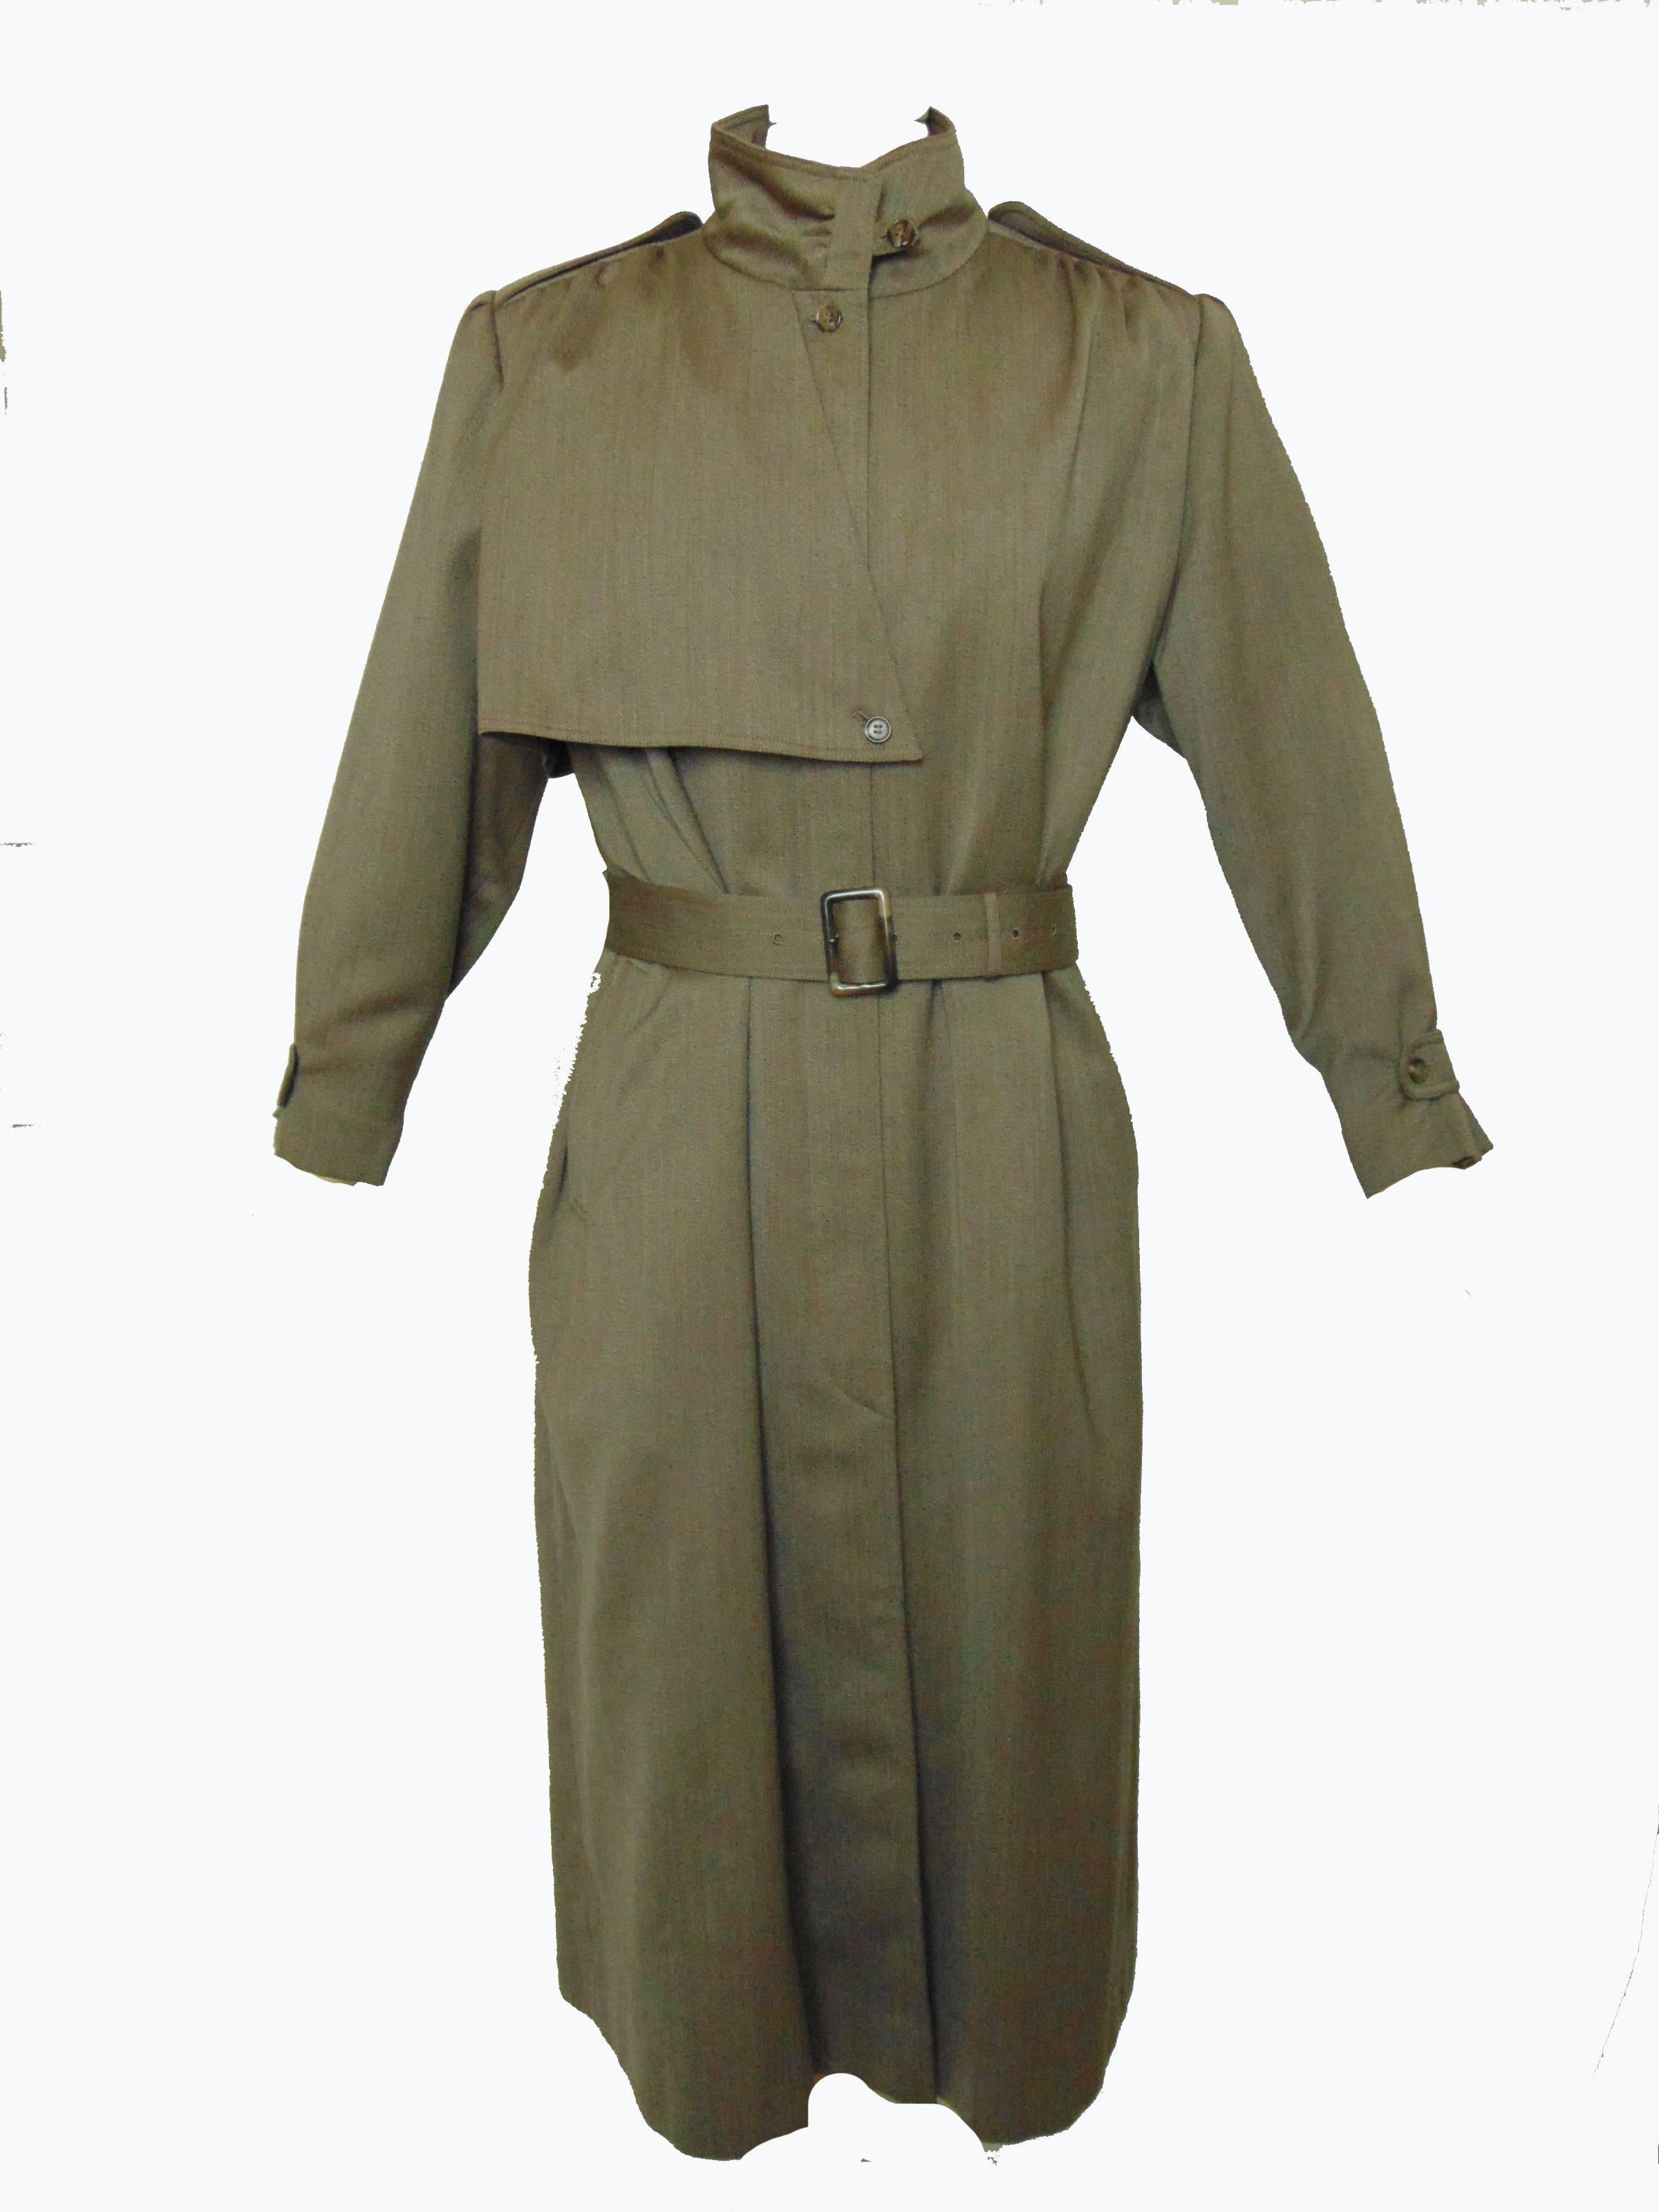 This trench coat was created by Sanyo exclusively for Saks Fifth Avenue, most likely in the early 1990s.  The shell is made from 100% wool and the removable warmer is a wool/nylon blend.  Tagged size 10, it measures: shoulders - 17